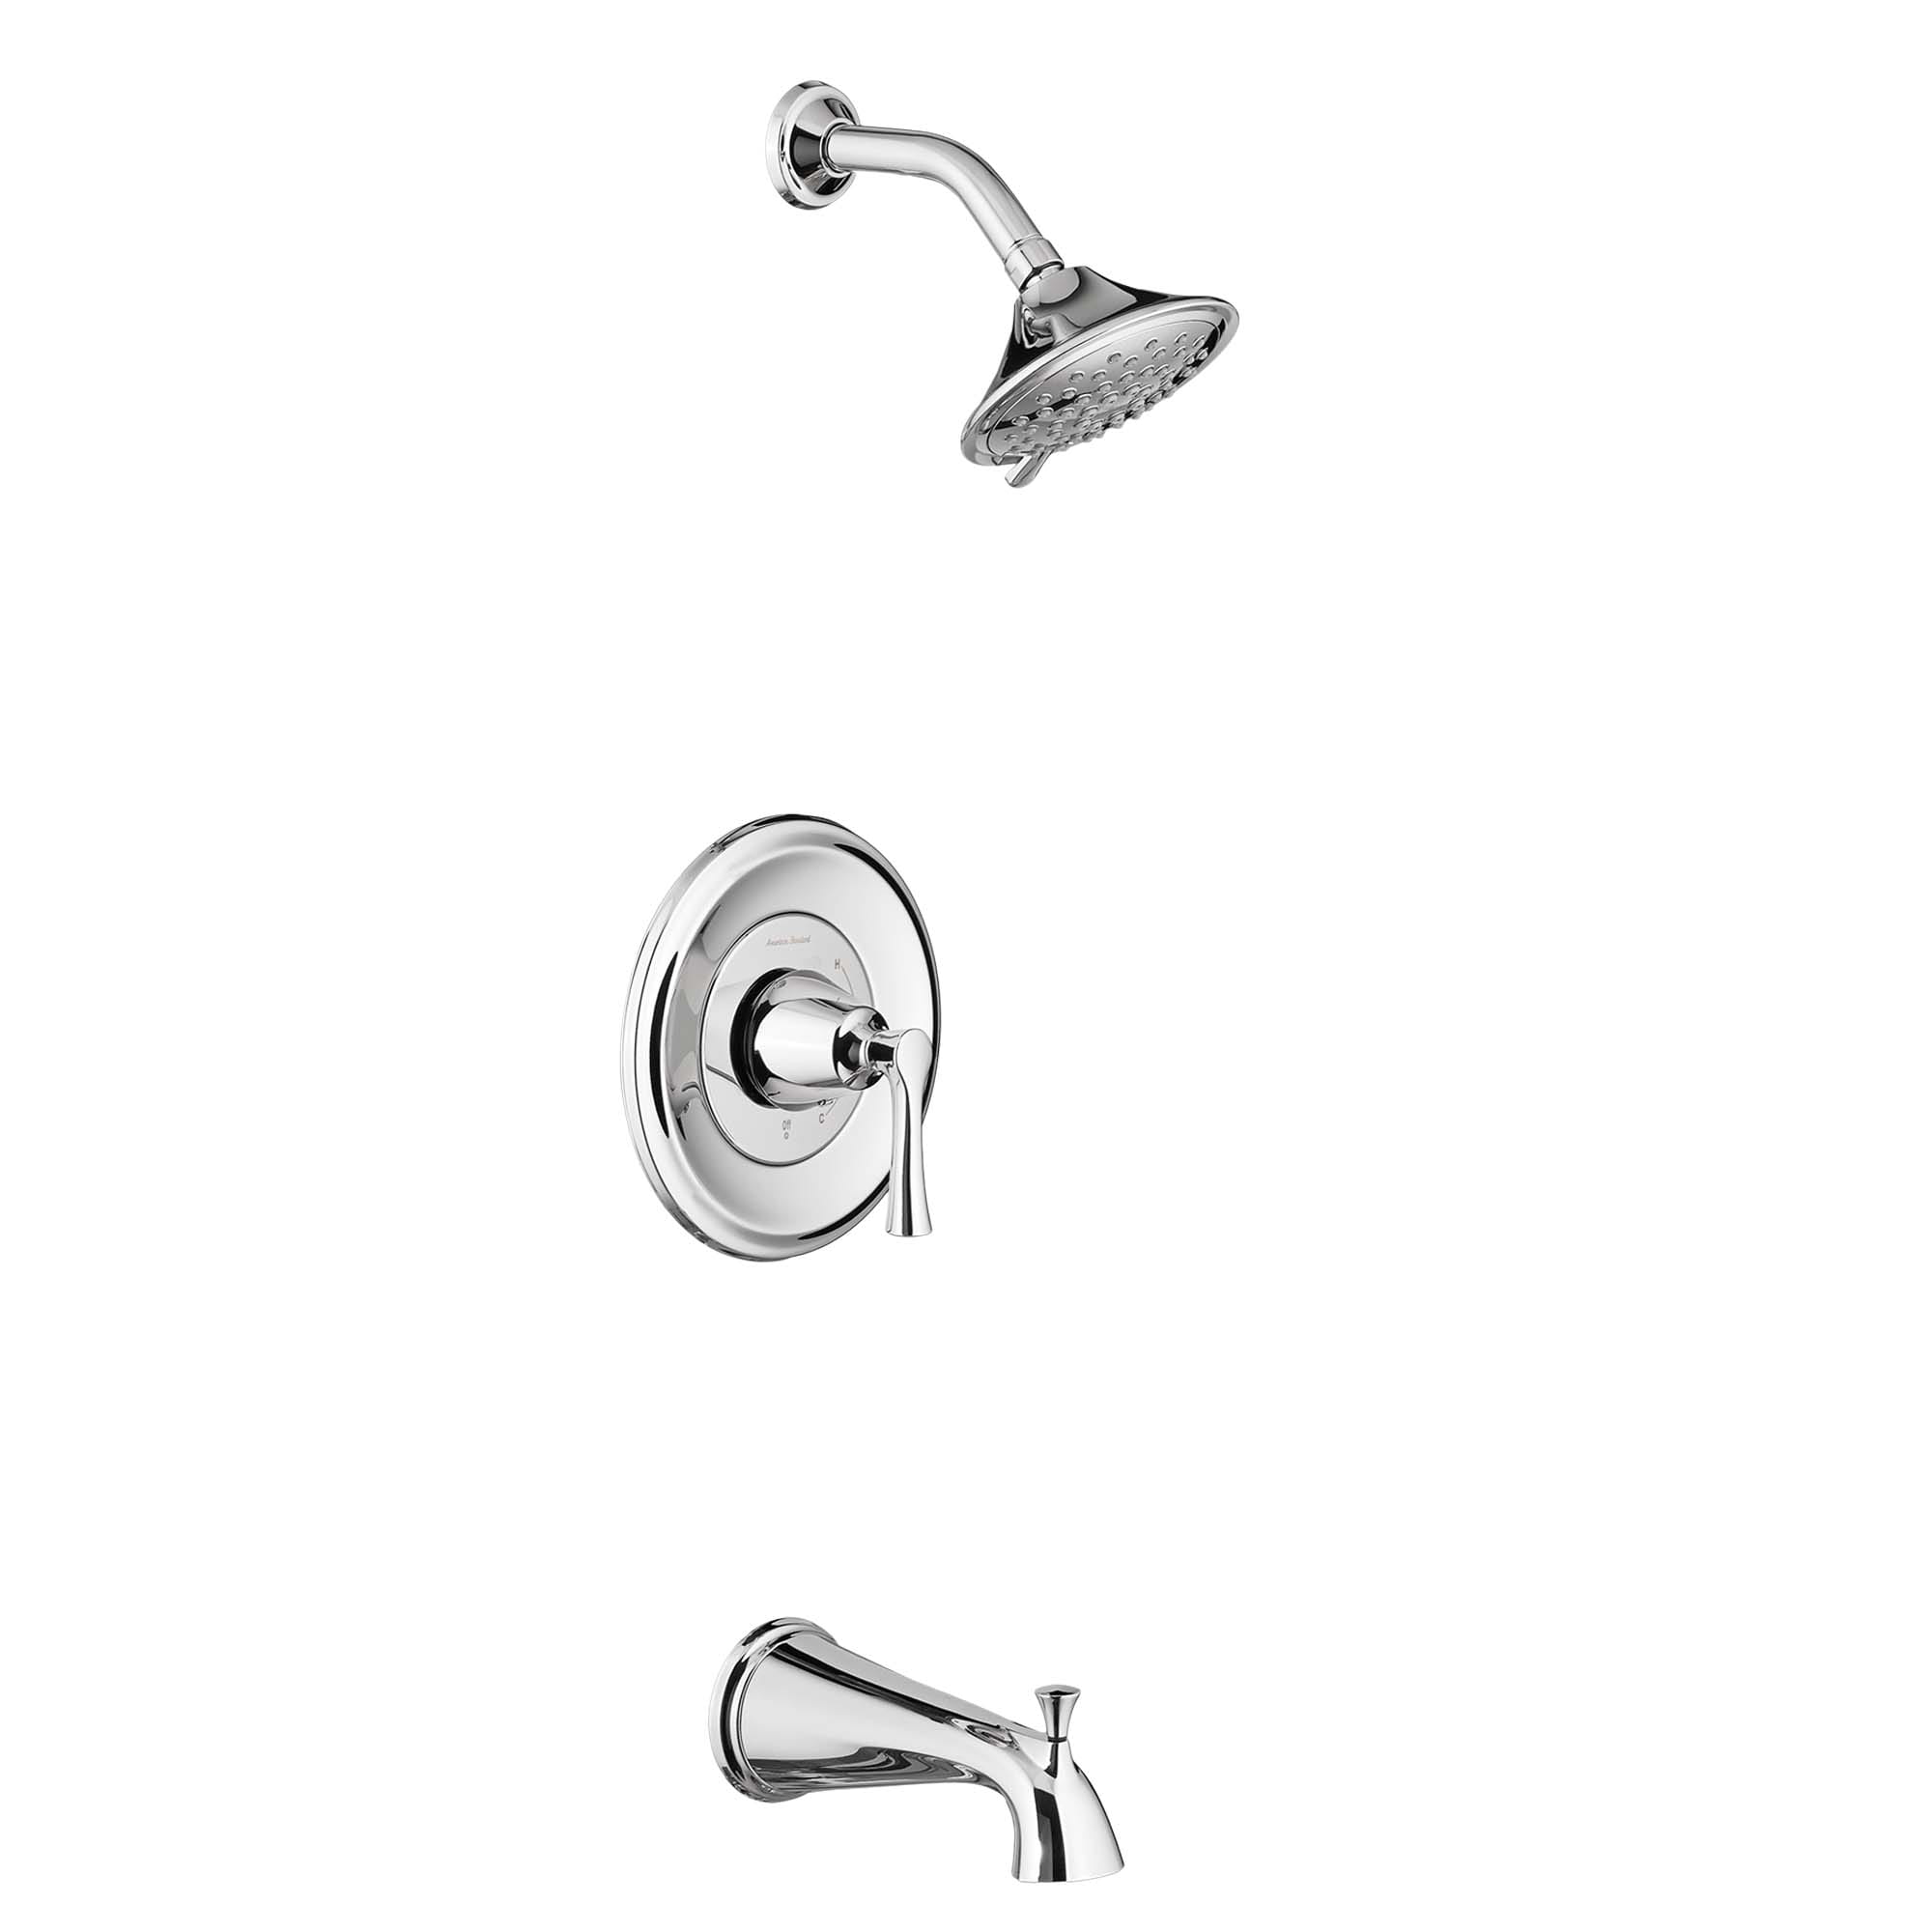 Estate 2.5 GPM Tub and Shower Trim Kit with 3-Function Showerhead and Lever Handle